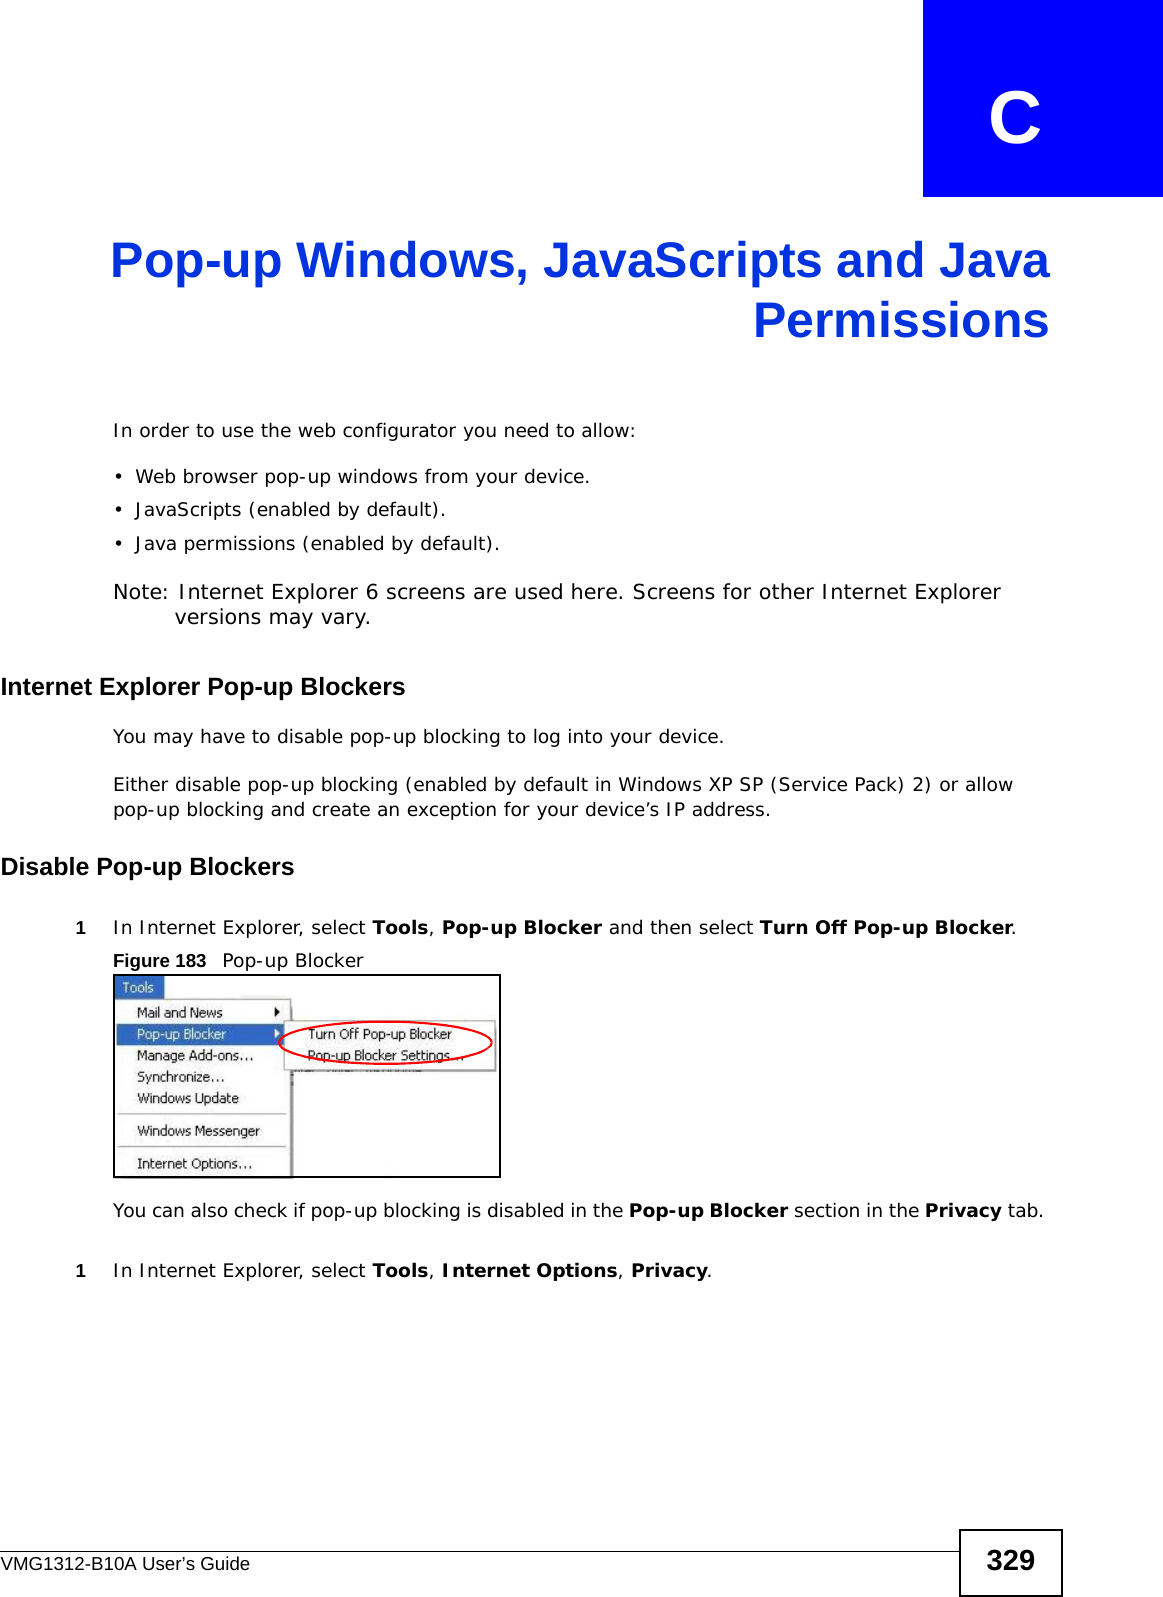 VMG1312-B10A User’s Guide 329APPENDIX   CPop-up Windows, JavaScripts and JavaPermissionsIn order to use the web configurator you need to allow:• Web browser pop-up windows from your device.• JavaScripts (enabled by default).• Java permissions (enabled by default).Note: Internet Explorer 6 screens are used here. Screens for other Internet Explorer versions may vary.Internet Explorer Pop-up BlockersYou may have to disable pop-up blocking to log into your device. Either disable pop-up blocking (enabled by default in Windows XP SP (Service Pack) 2) or allow pop-up blocking and create an exception for your device’s IP address.Disable Pop-up Blockers1In Internet Explorer, select Tools, Pop-up Blocker and then select Turn Off Pop-up Blocker. Figure 183   Pop-up BlockerYou can also check if pop-up blocking is disabled in the Pop-up Blocker section in the Privacy tab. 1In Internet Explorer, select Tools, Internet Options, Privacy.